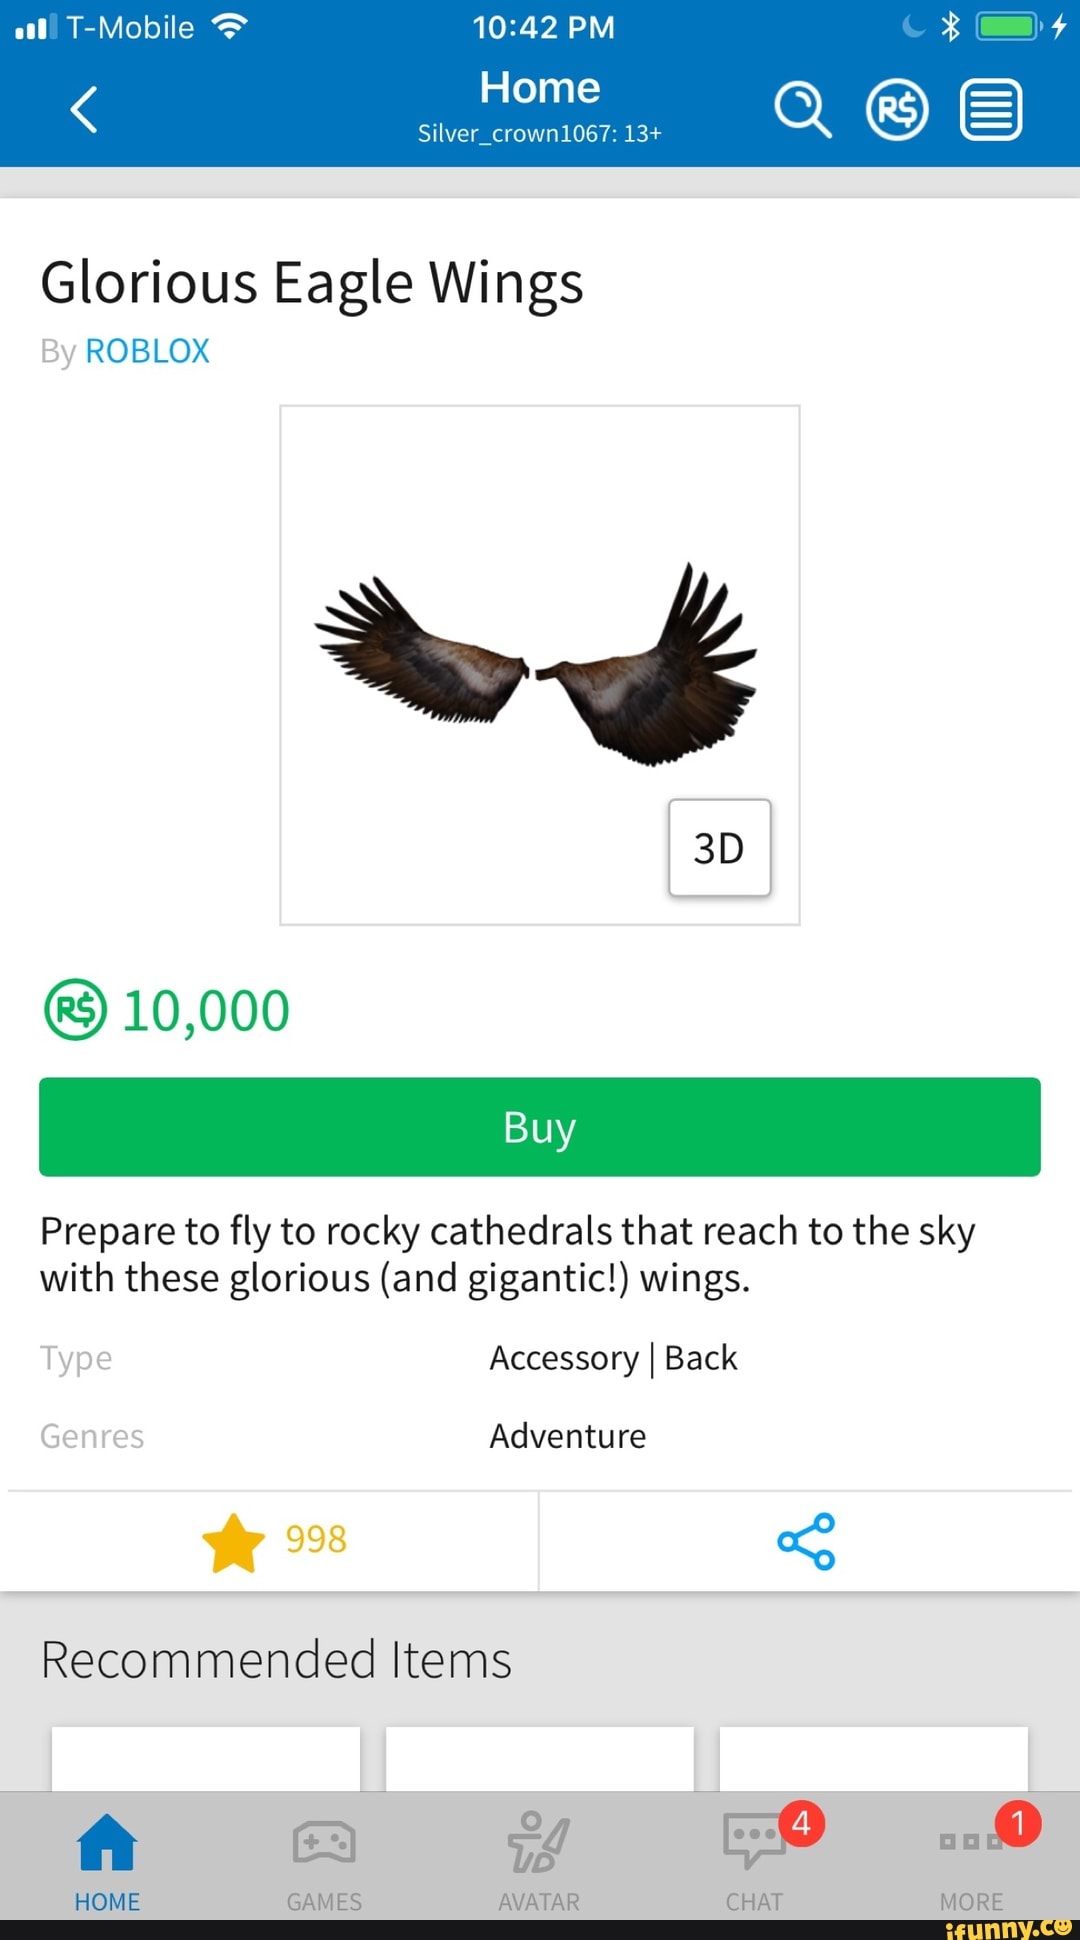 Il T Mobile 10 42 Pm Glorious Eagle Wings Roblox Prepare To Fly To Rocky Cathedrals That Reach To The Sky With These Glorious And Gigantic Wings Accessory I Back Ifunny - 330 am roblox